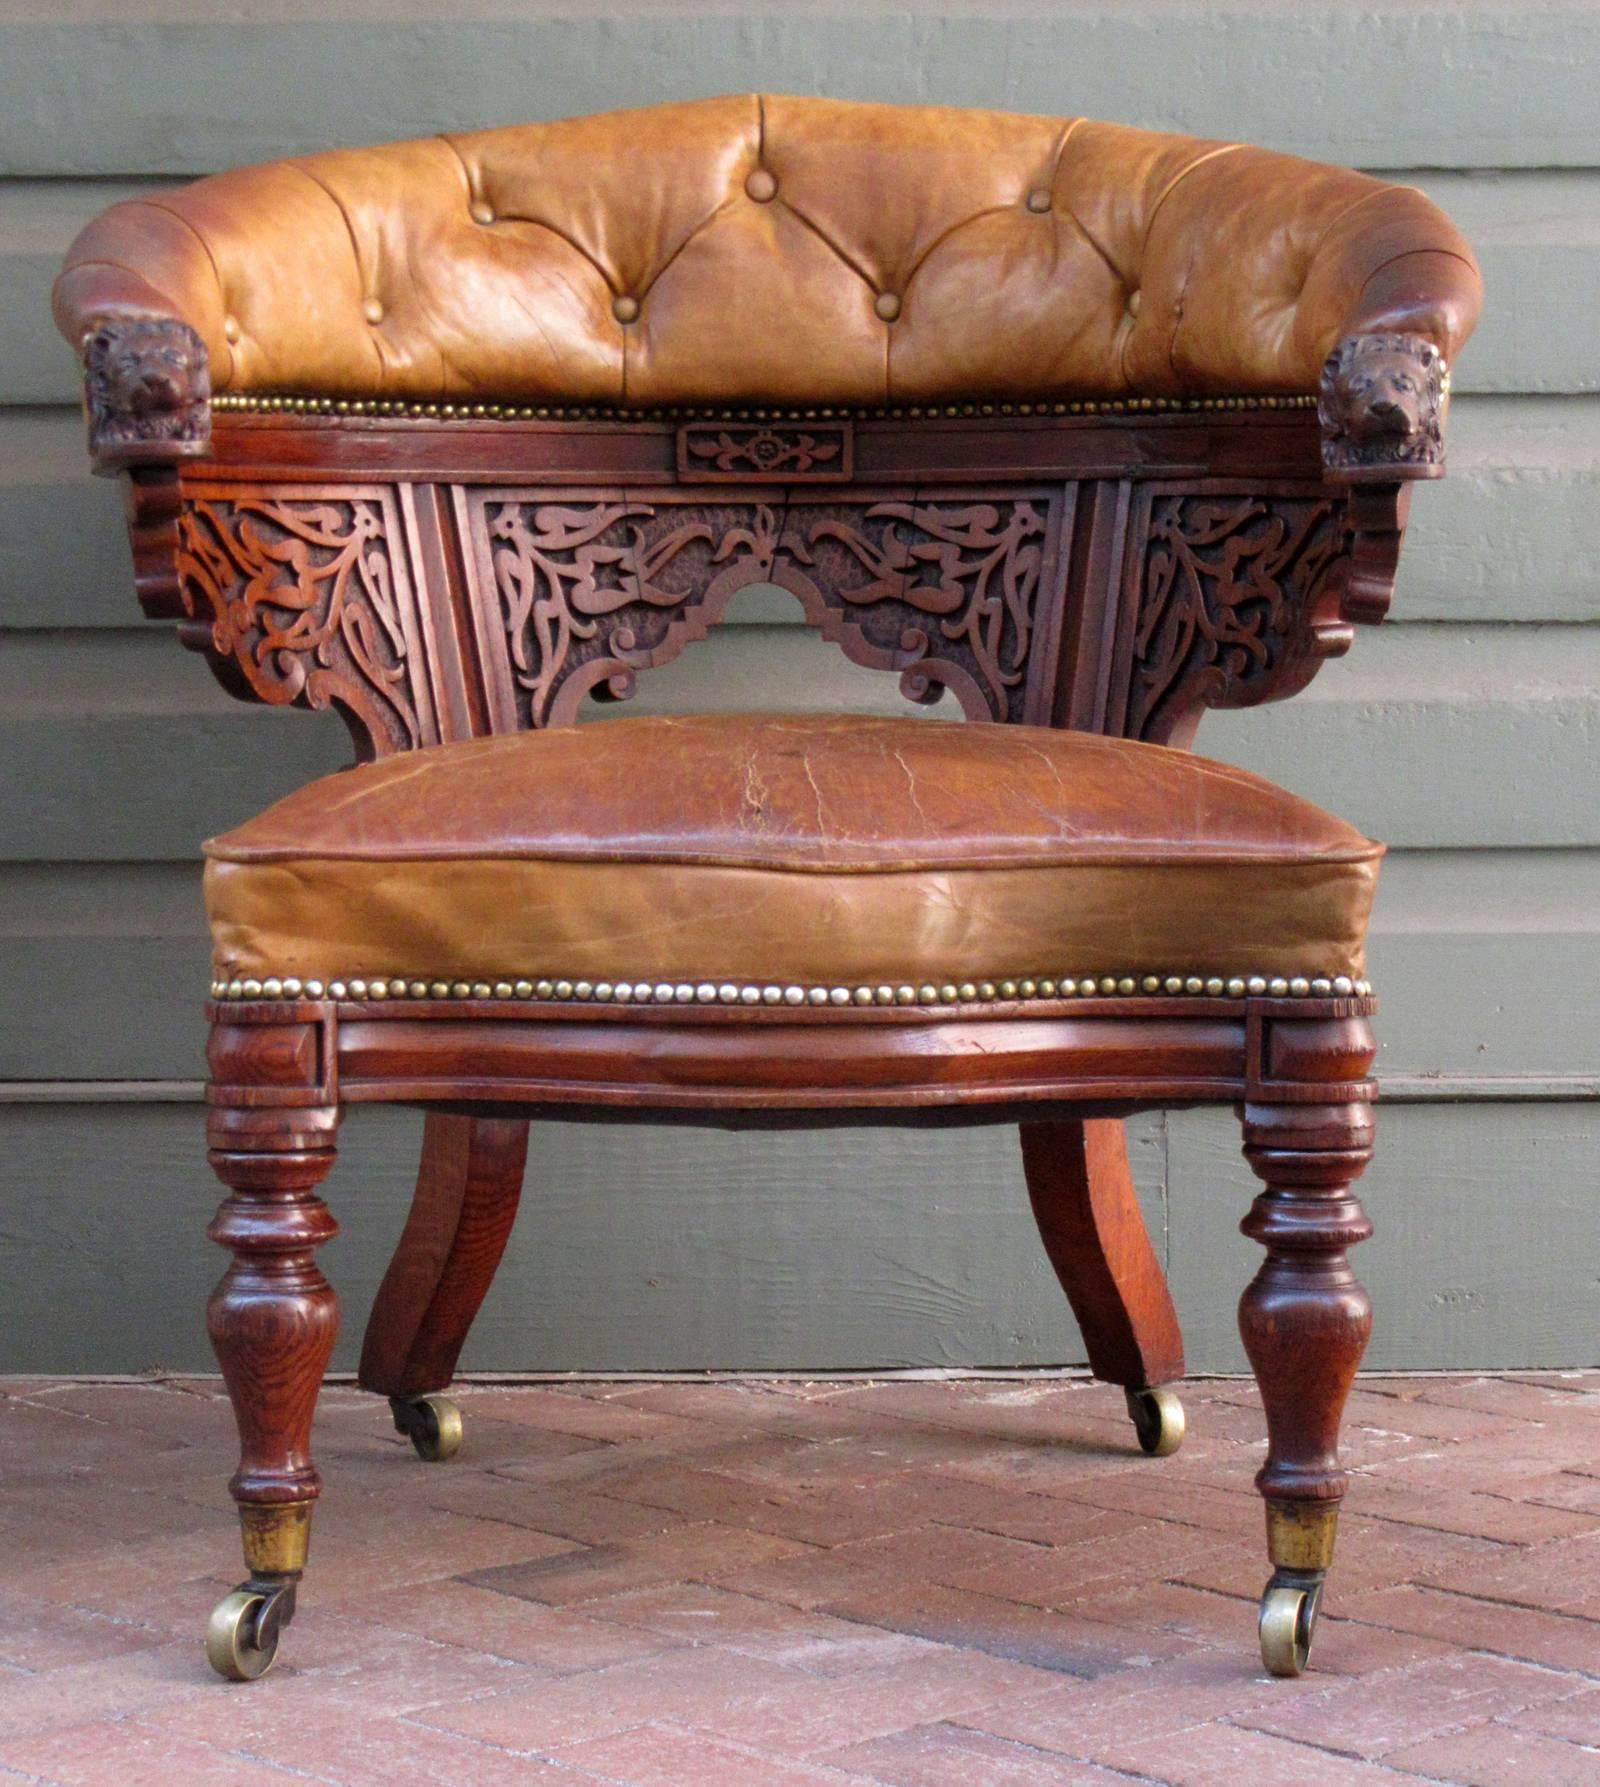 A handsome English oak barrel back gentleman's chair, circa 1820, featuring dramatic carvings with lion heads, original tufted leather upholstery and casters. The leather seat can has a clean tear approximately 8